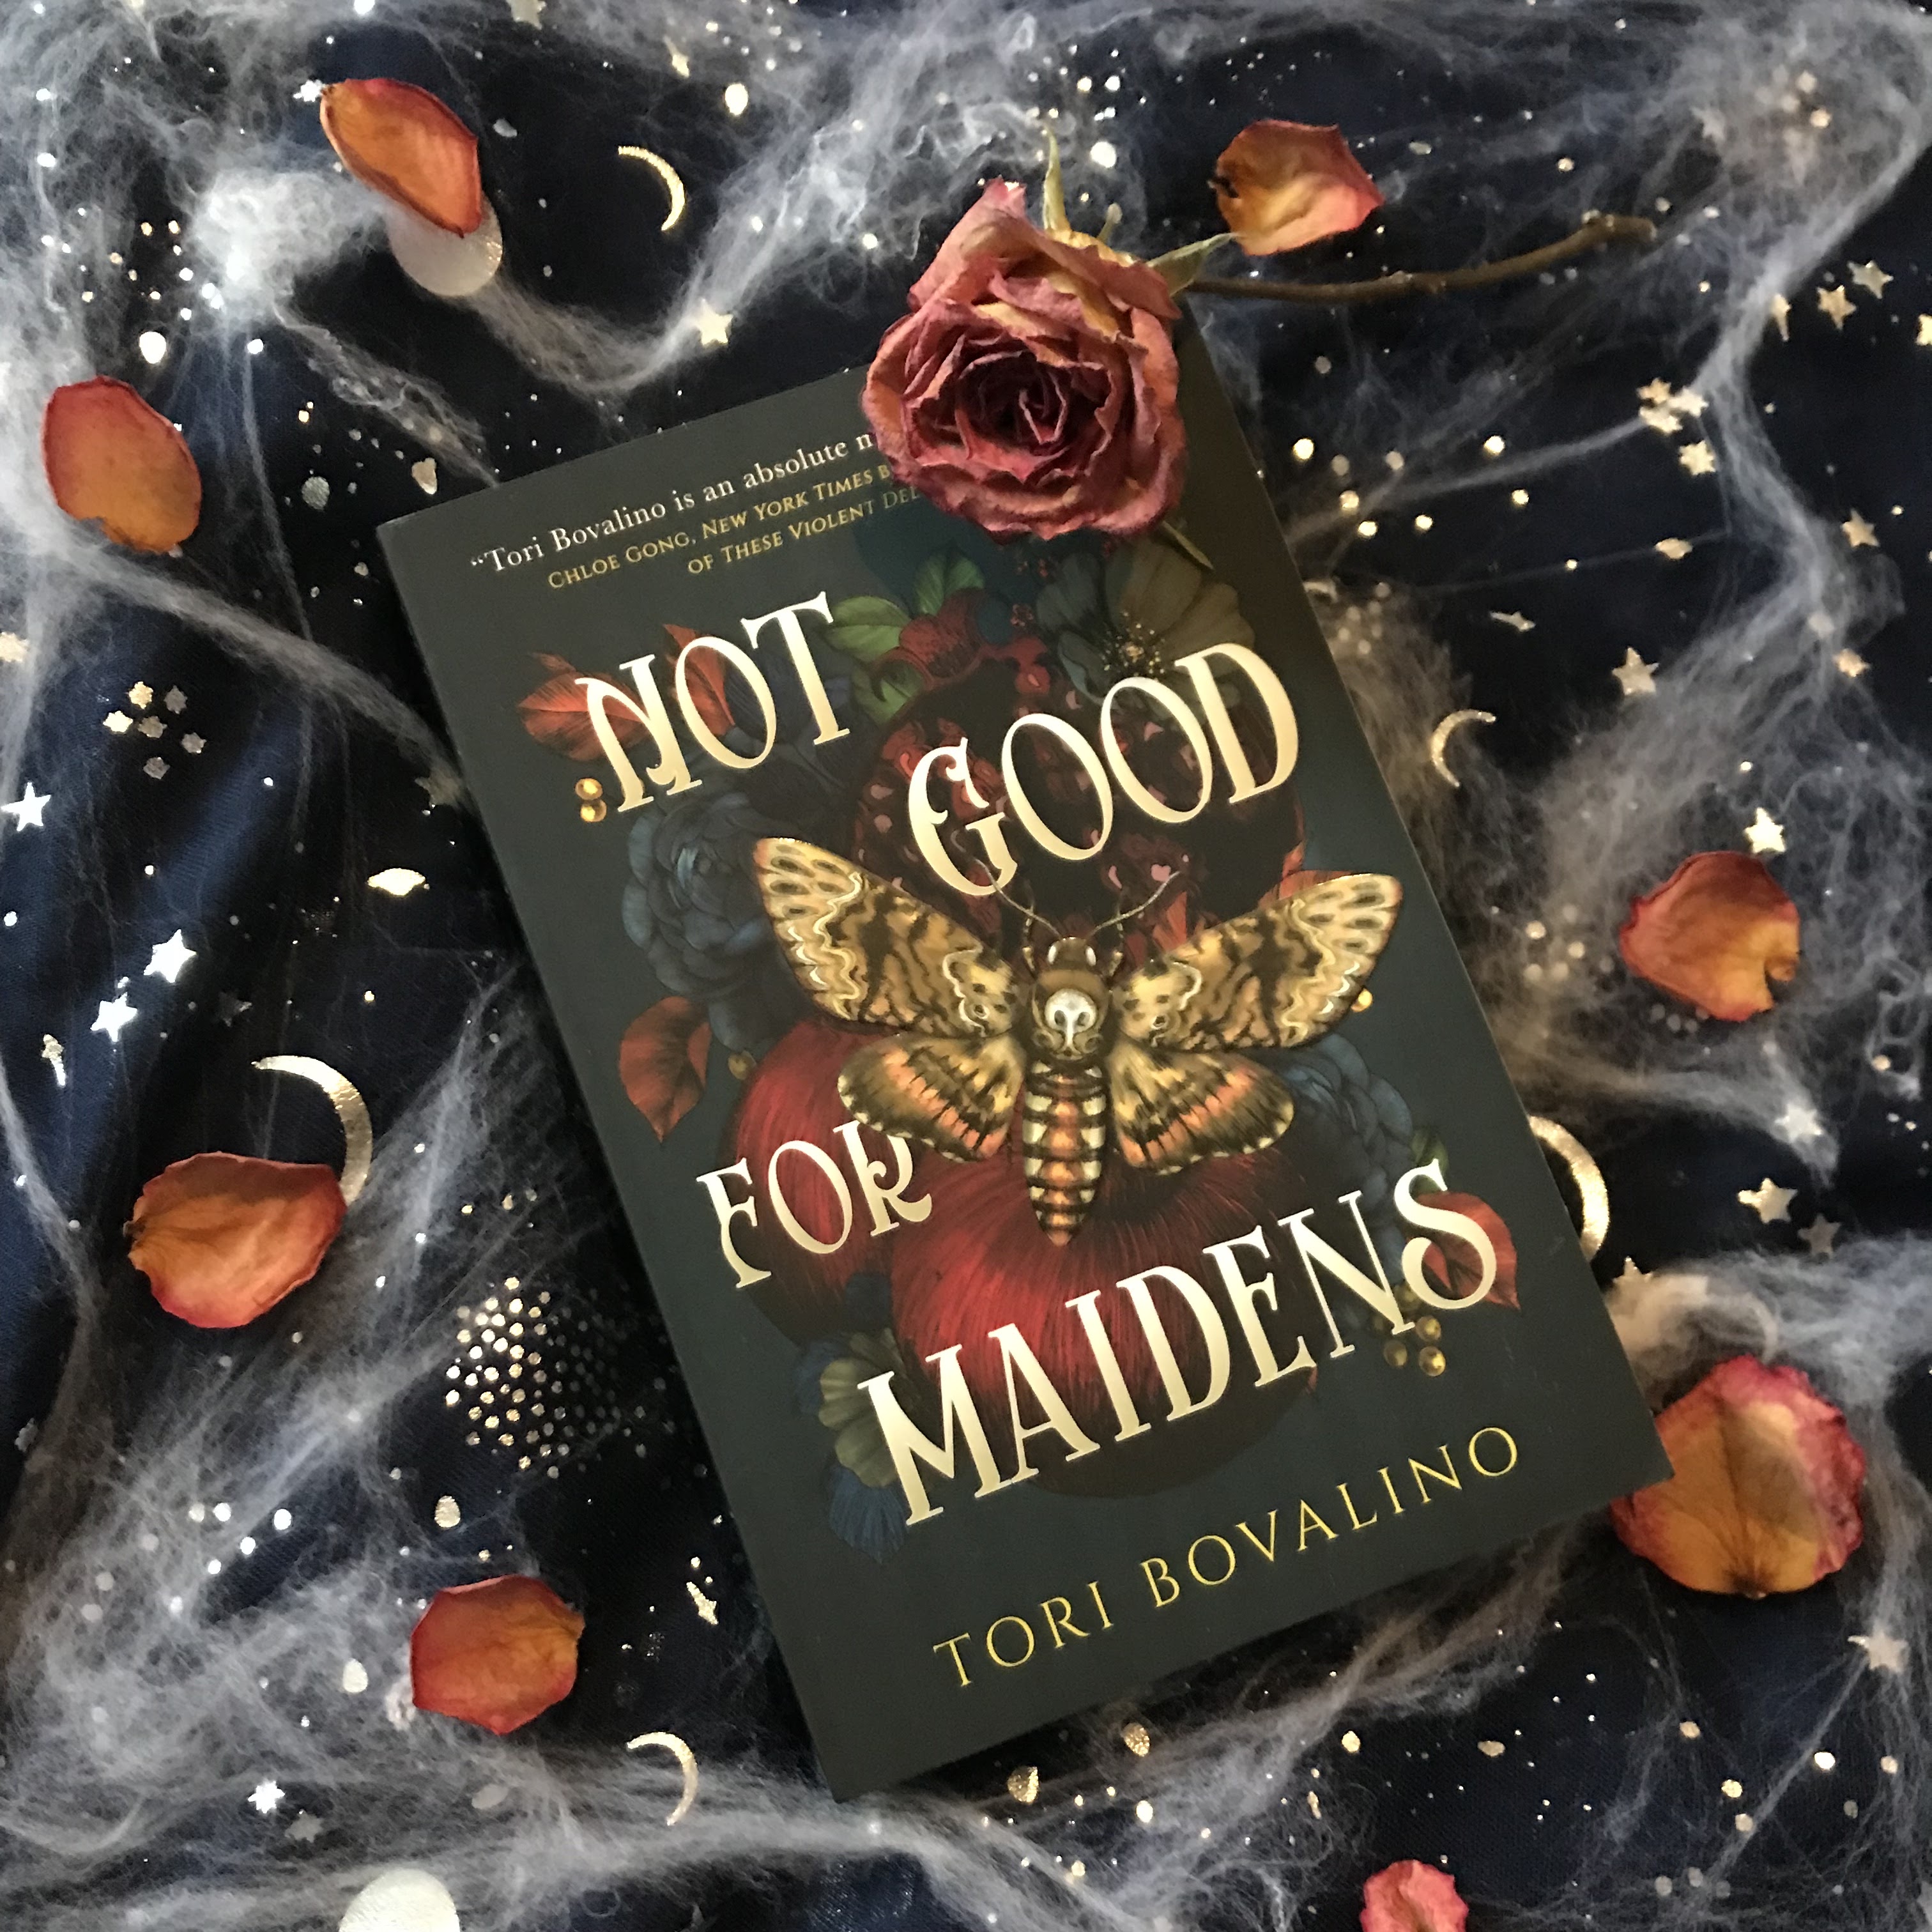 Not Good for Maidens by Tori Bovalino is on a deep blue scarf with metallic silver moons and stars, on a diagonal top left to bottom right. Around it are fake cobwebs. On the top right corner of the book is a dried rose, and rose Bryan’s are scattered around the book.